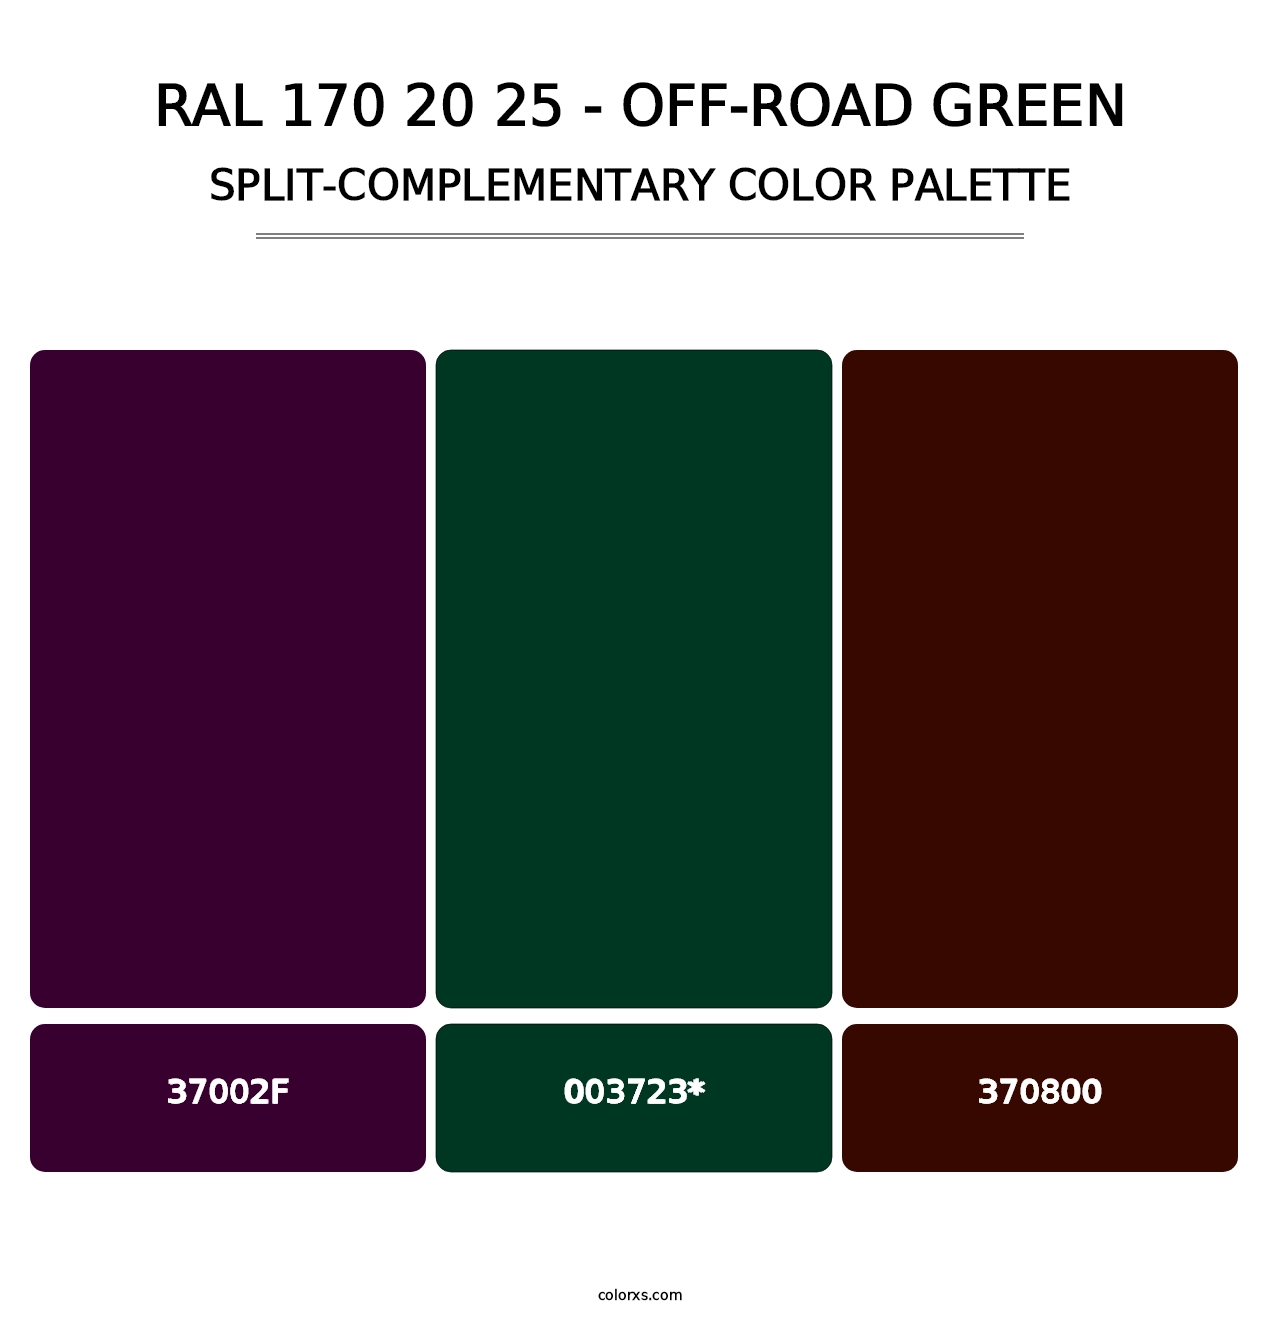 RAL 170 20 25 - Off-Road Green - Split-Complementary Color Palette